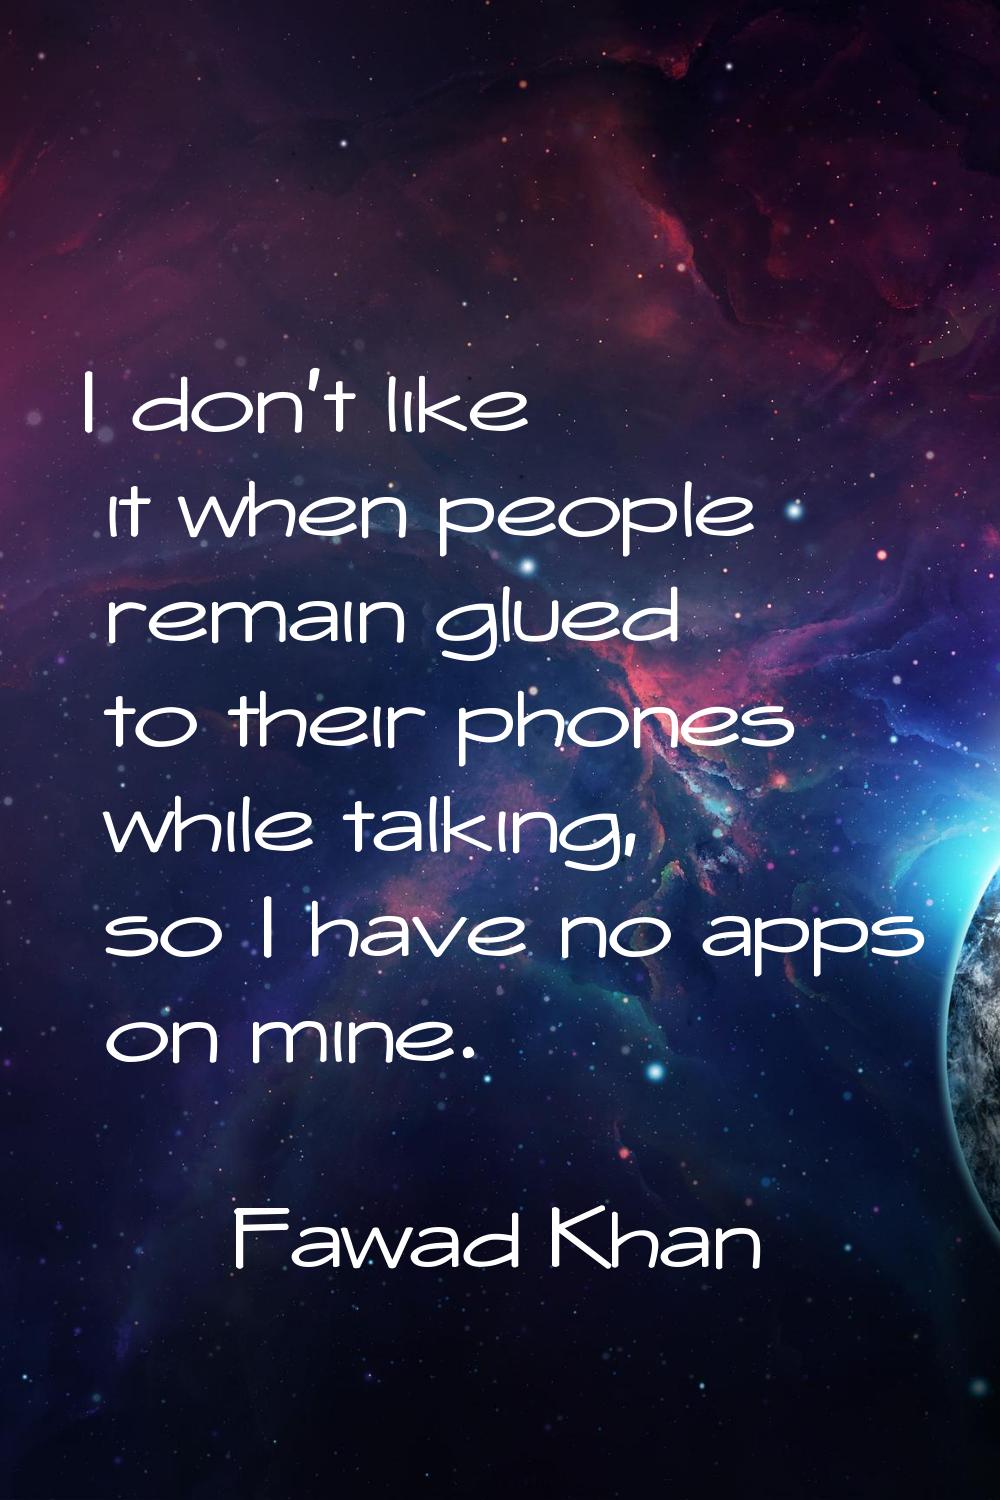 I don't like it when people remain glued to their phones while talking, so I have no apps on mine.